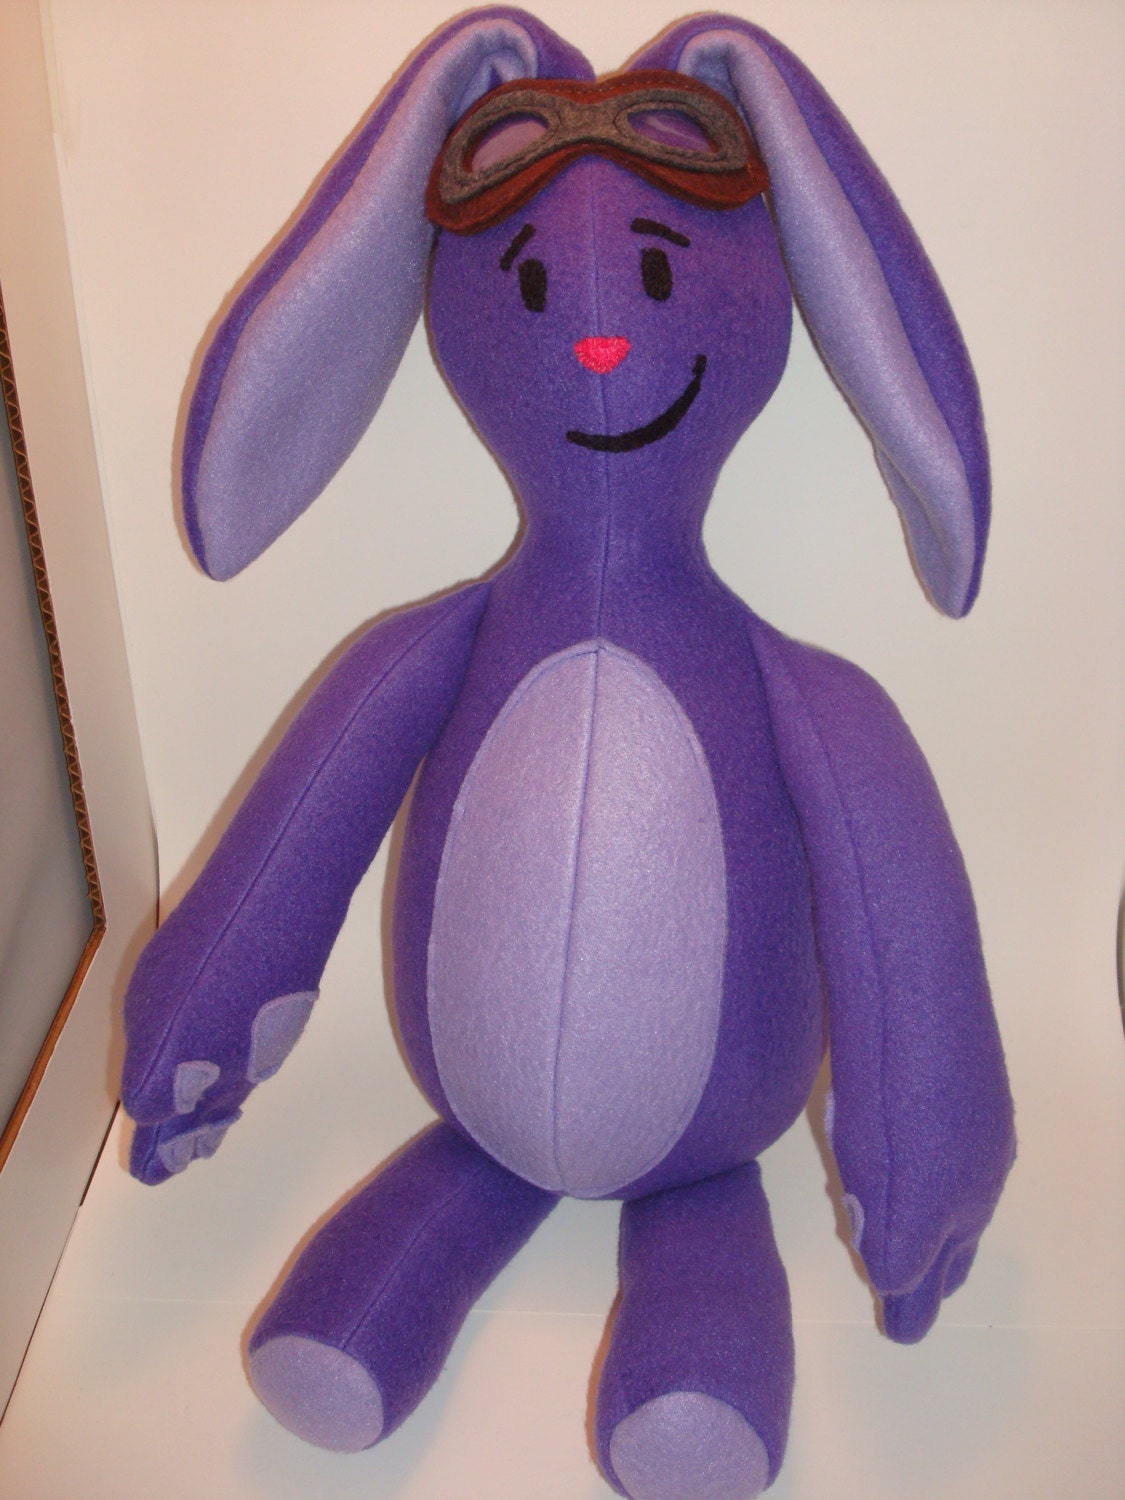 1 one Plush Purple Bunny Doll with Removable by StixandStitches